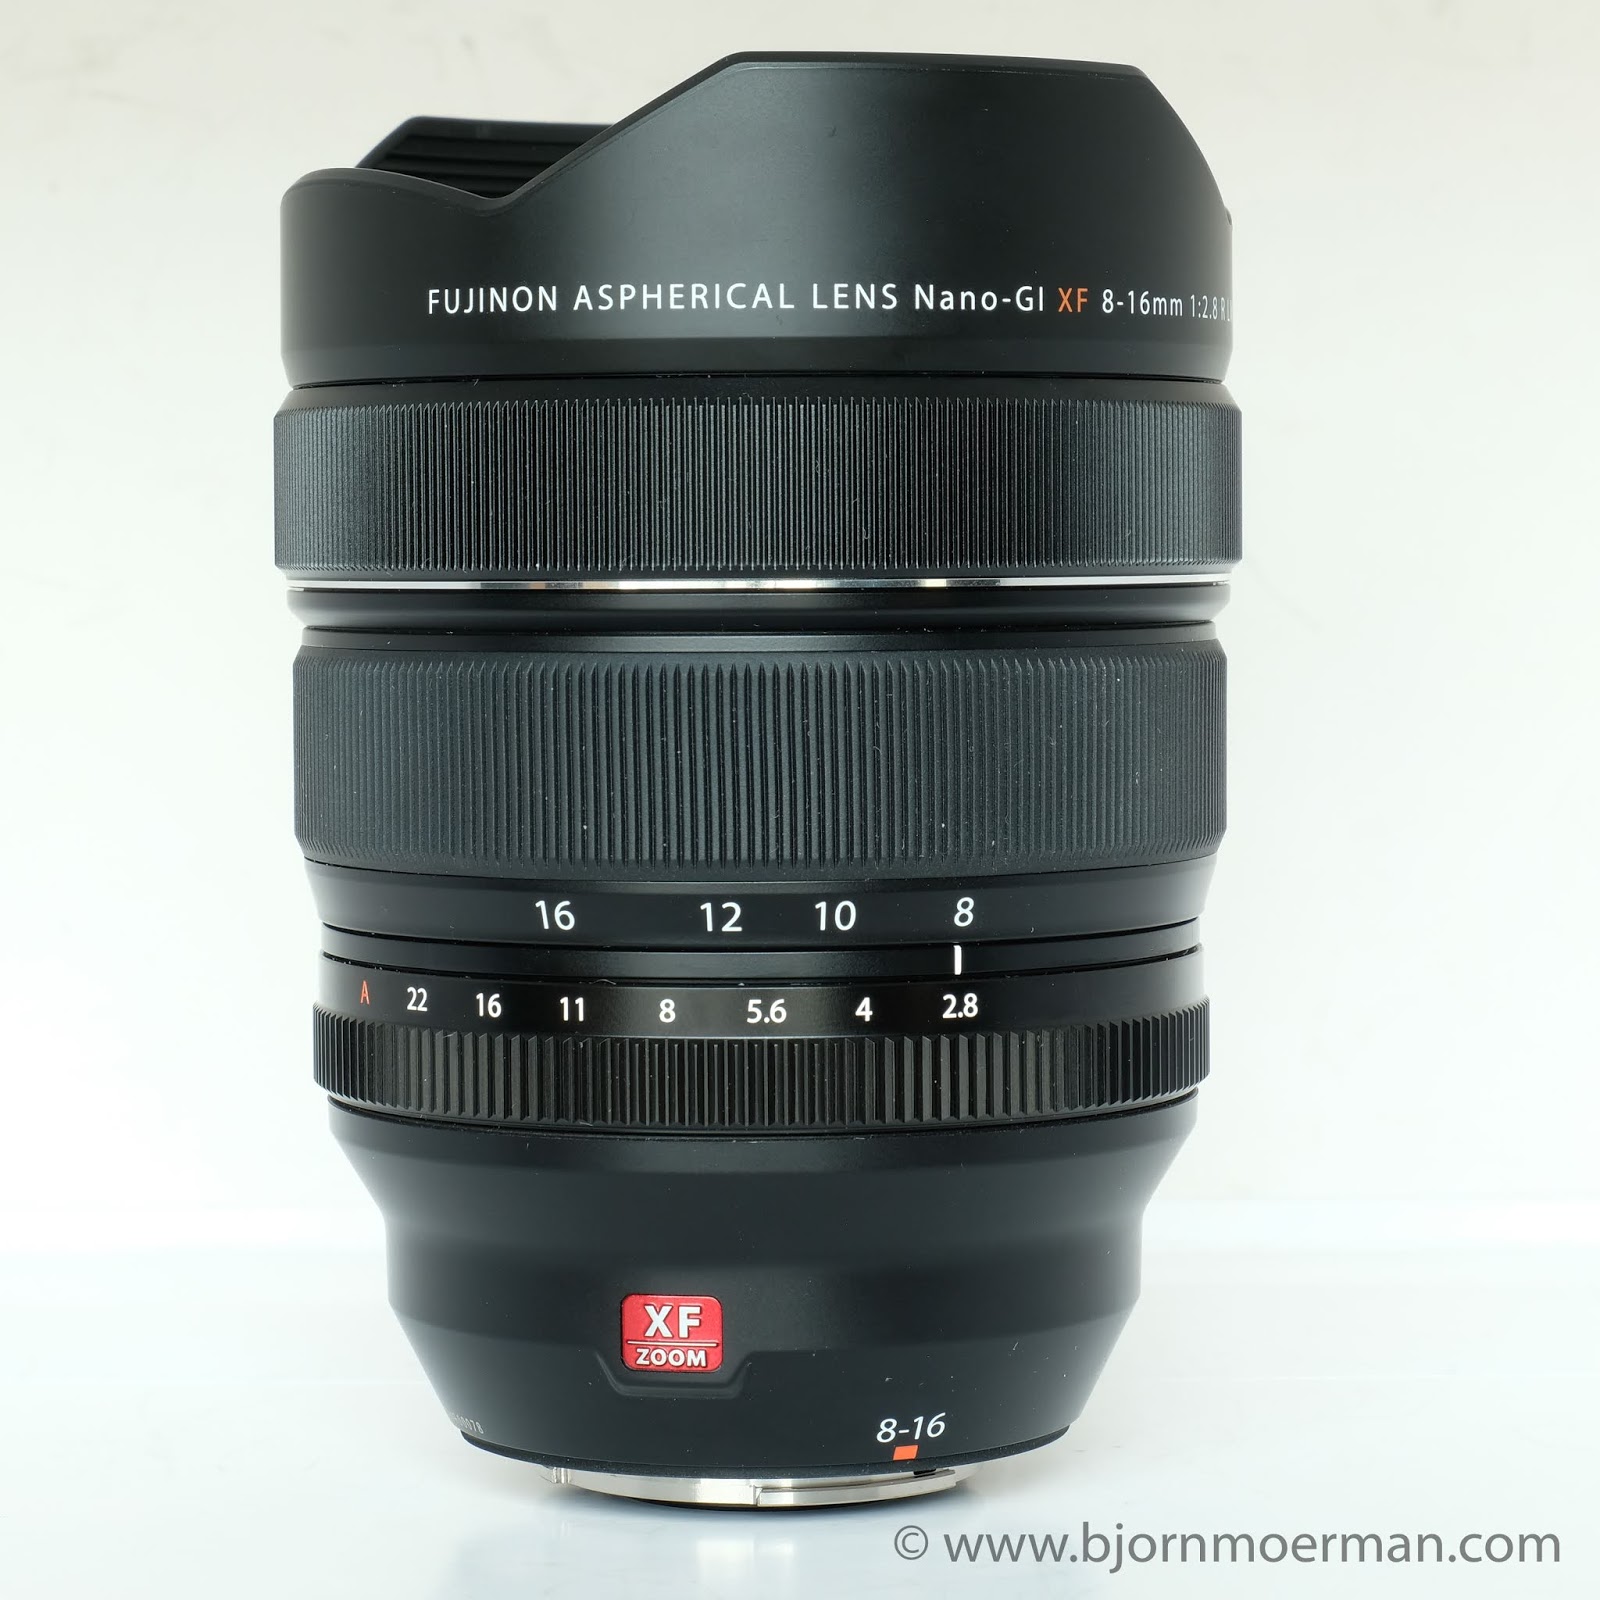 FIRST LOOK REVIEW: FUJIFILM XF 8-16mm f2.8 R LM WR